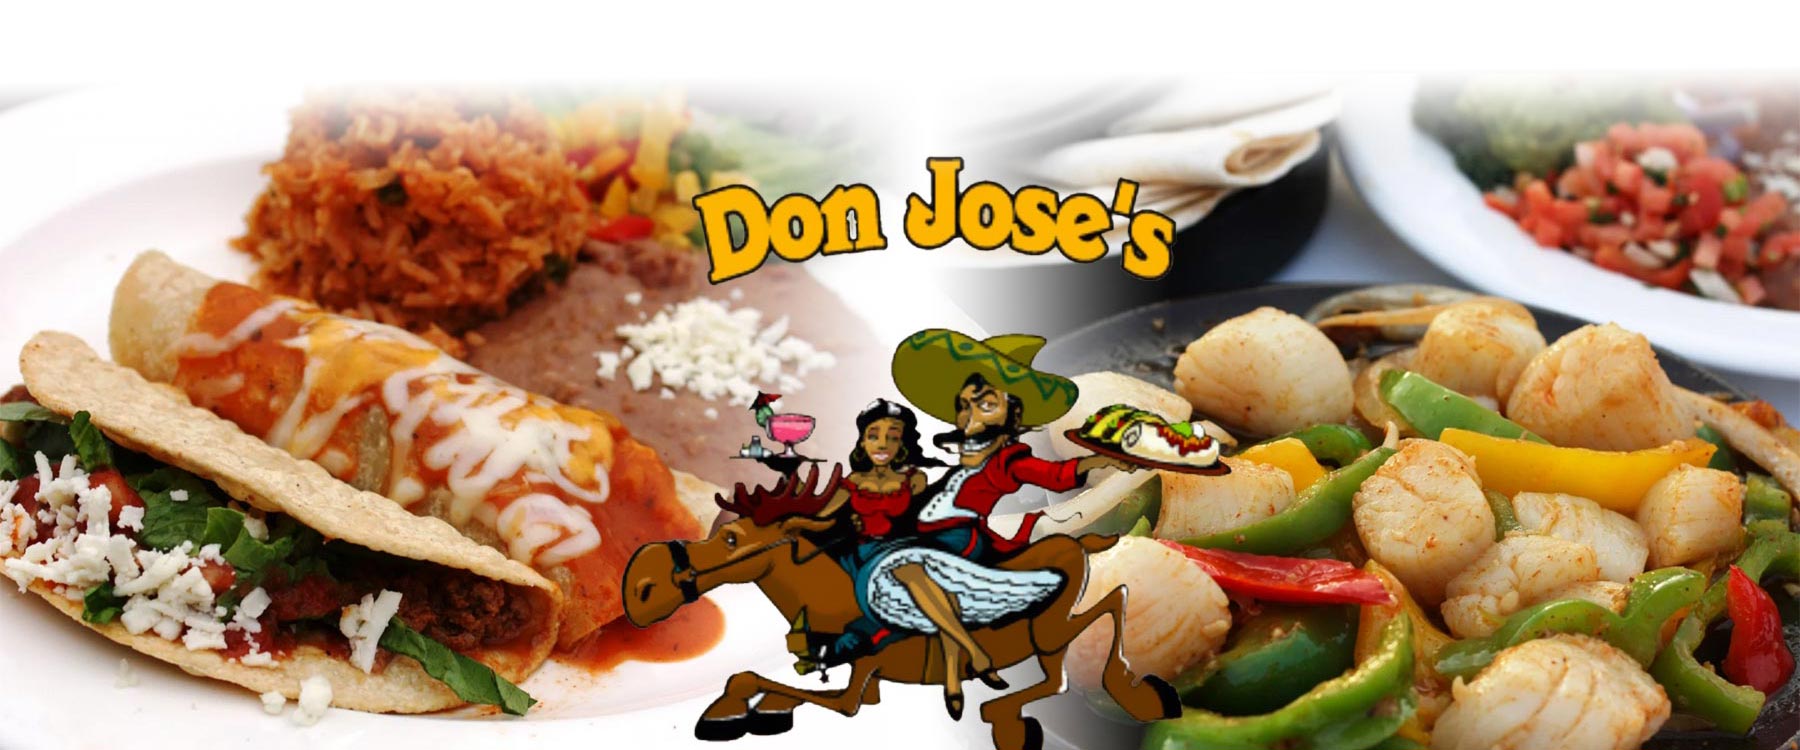 Don Jose's mexican food